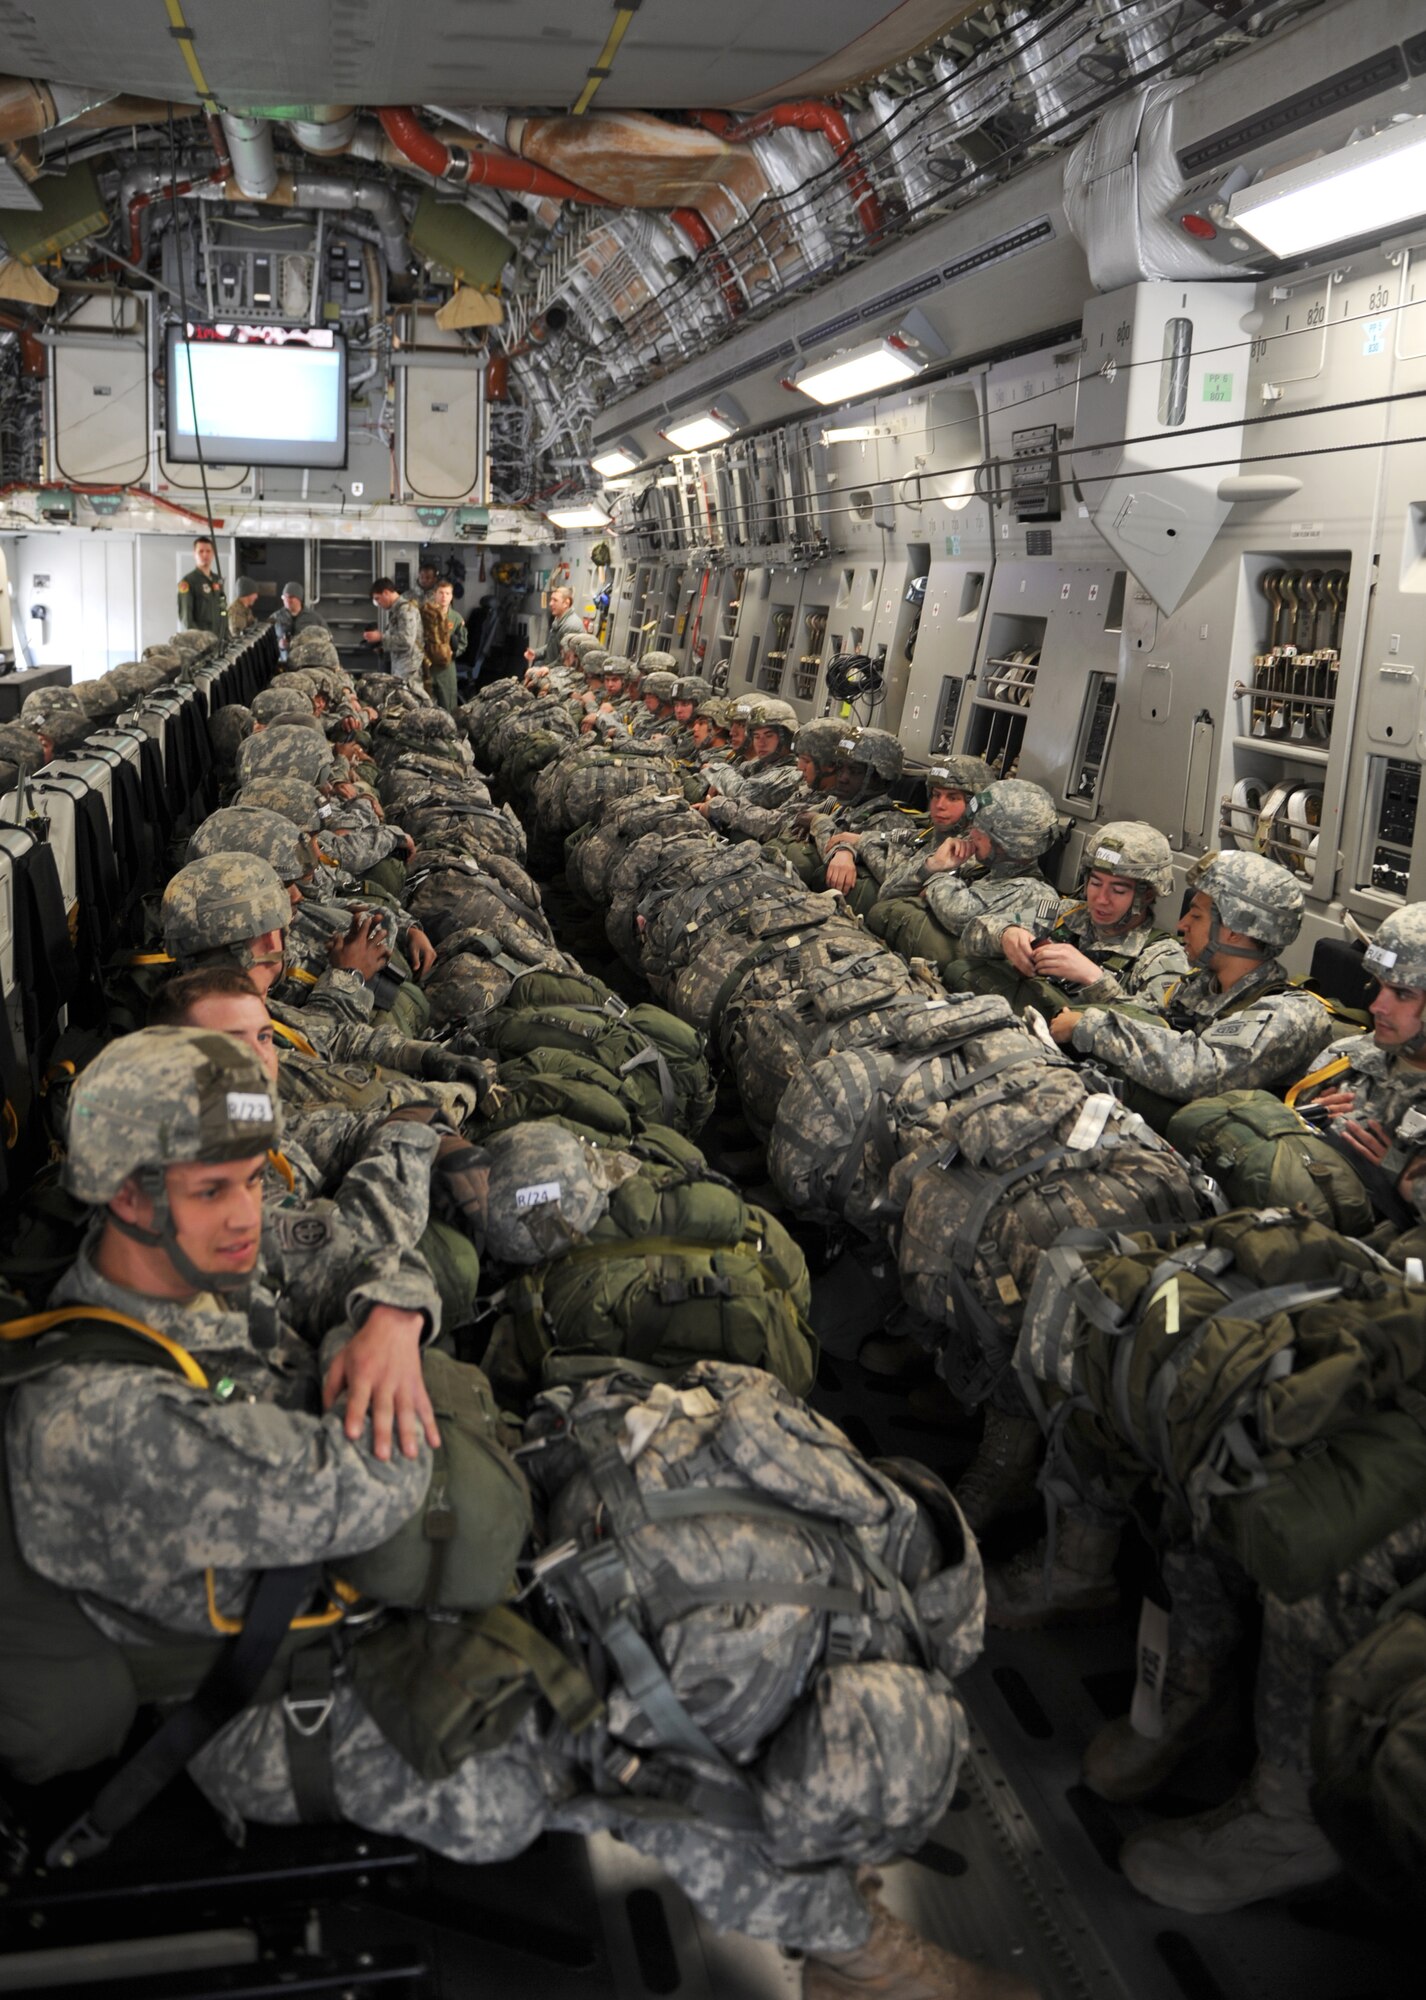 U.S. Army paratroopers sit aboard a U.S. Air Force C-17 Globemaster III to complete a static line air drop, Feb. 25, 2015, Fort Bragg, N.C. The Joint Operational Access Exercise (JOAX) 13-02 is a combined exercise to prepare elements of the 82nd Airborne Division, along with its partners and enablers to respond as part of the Global Response Force (GRF). (U.S. Air Force photo by Senior Airman Jaclyn McDonald)